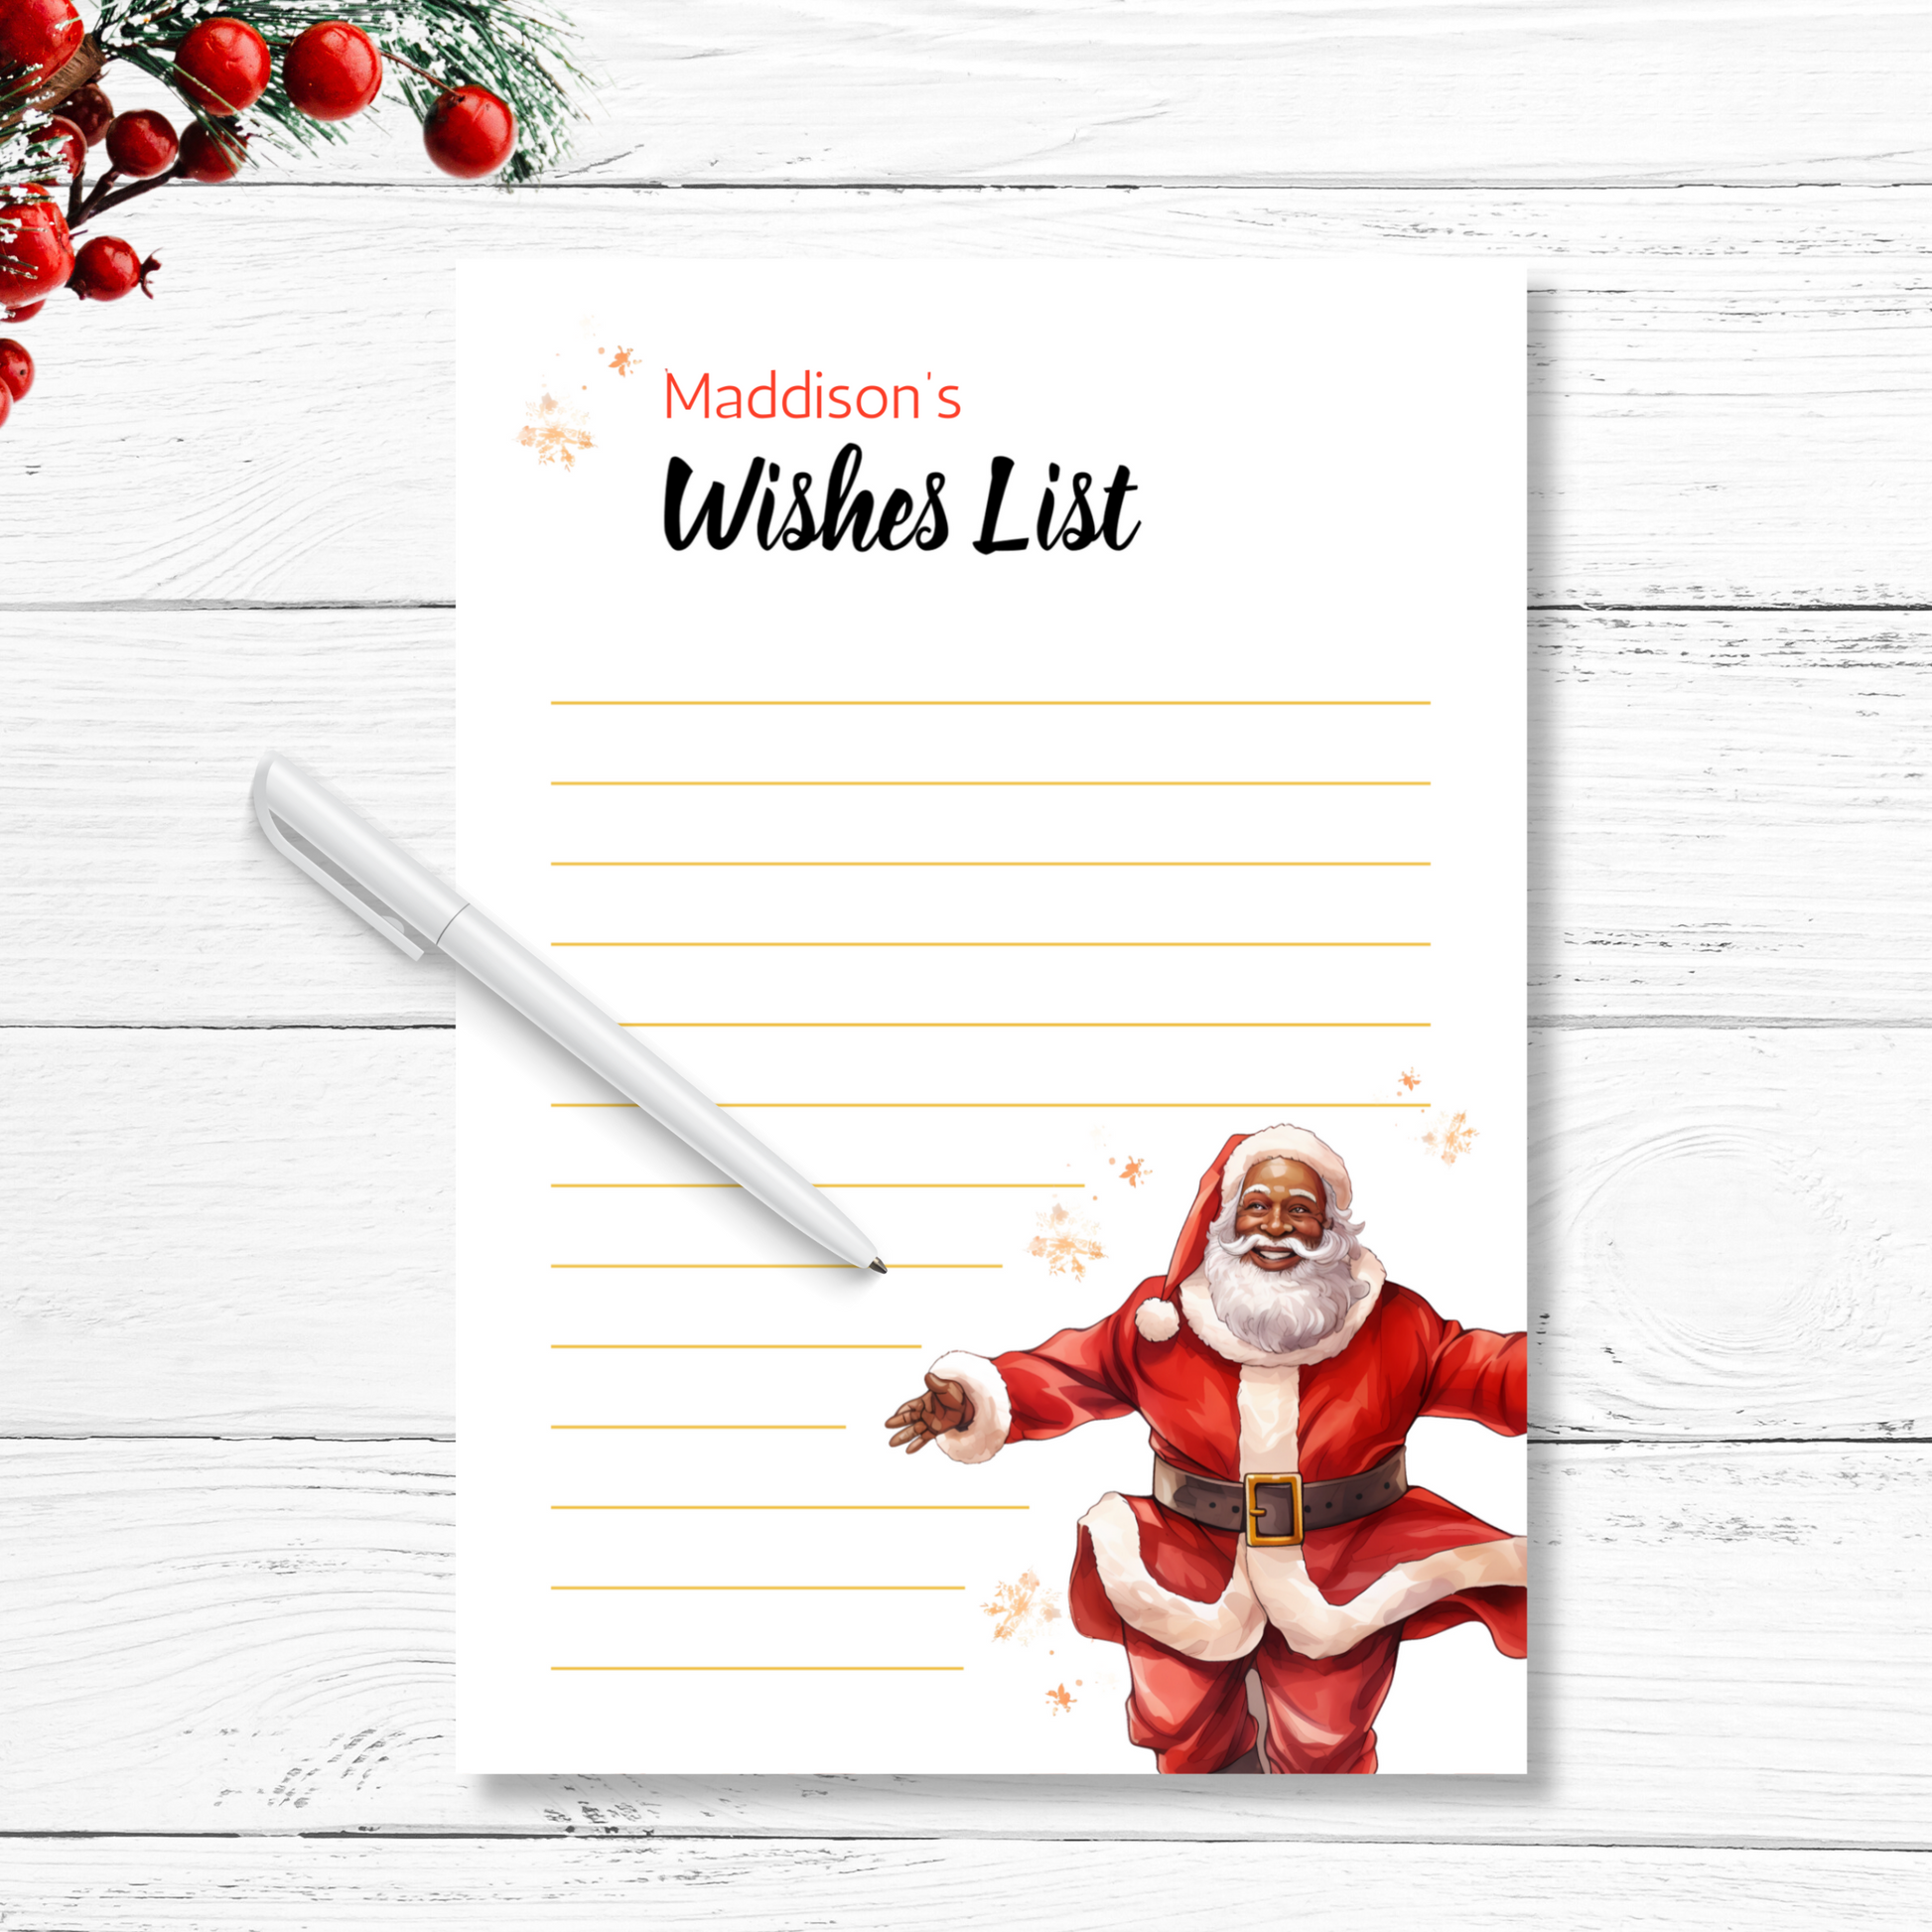 Personalized Black Santa Needs Your Help Red Magic Wish coin Card for kids christmas eve keepsake stocking gift idea for parents, easy instant digital download printable